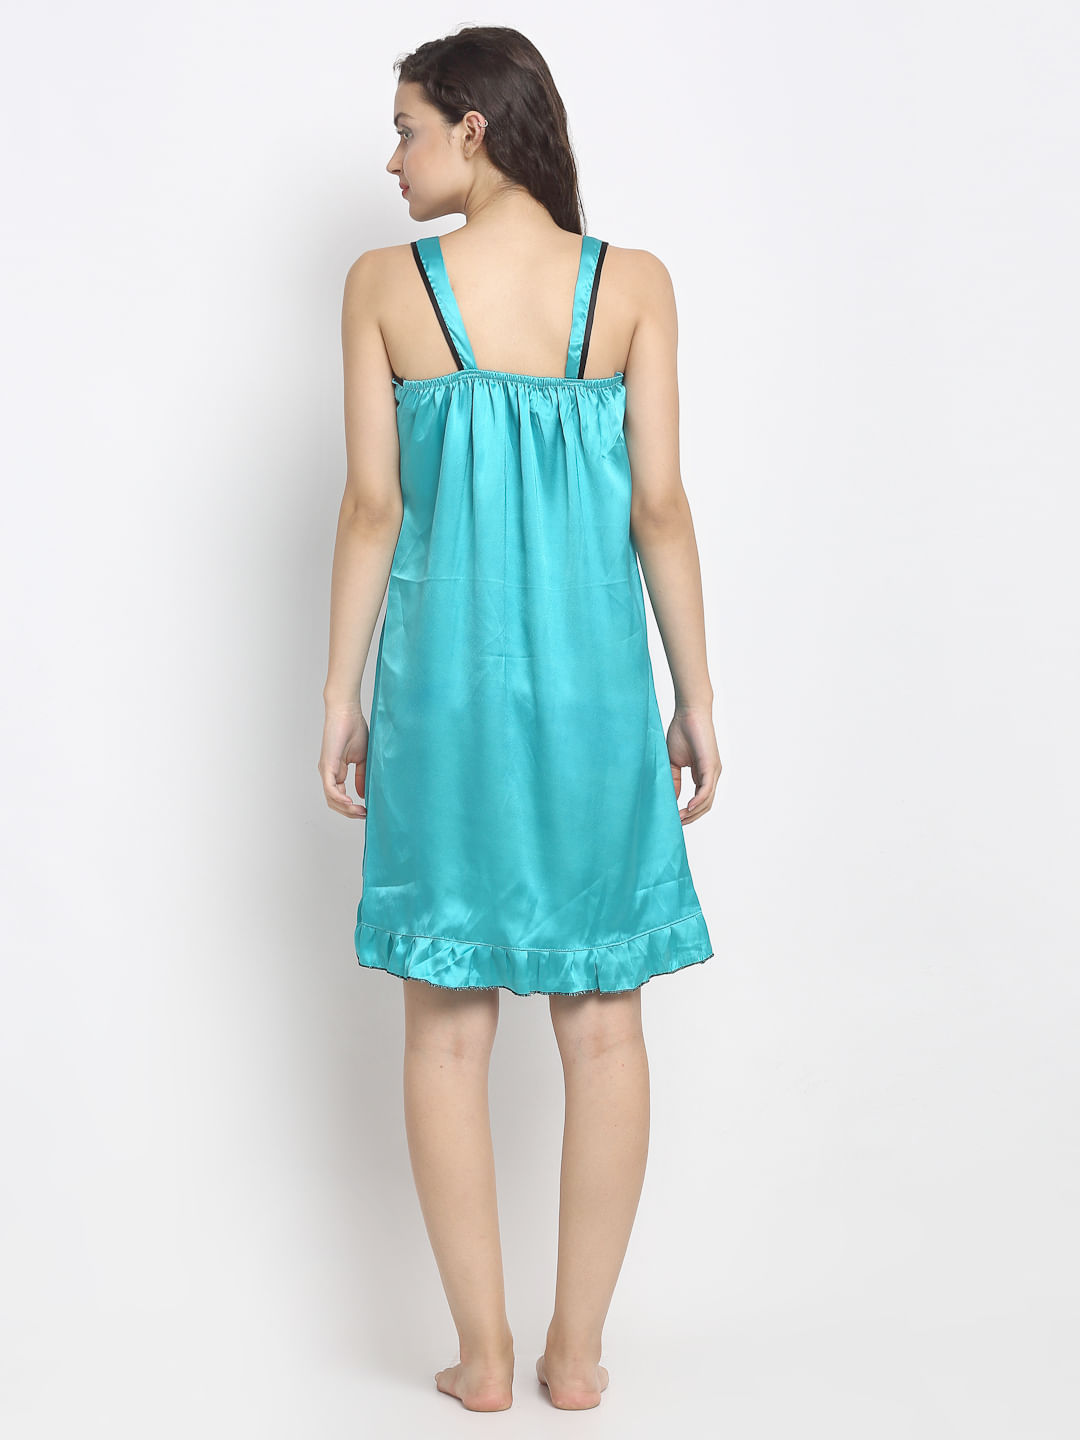 Turquoise Blue Solid Satin Babydoll (Free Size)